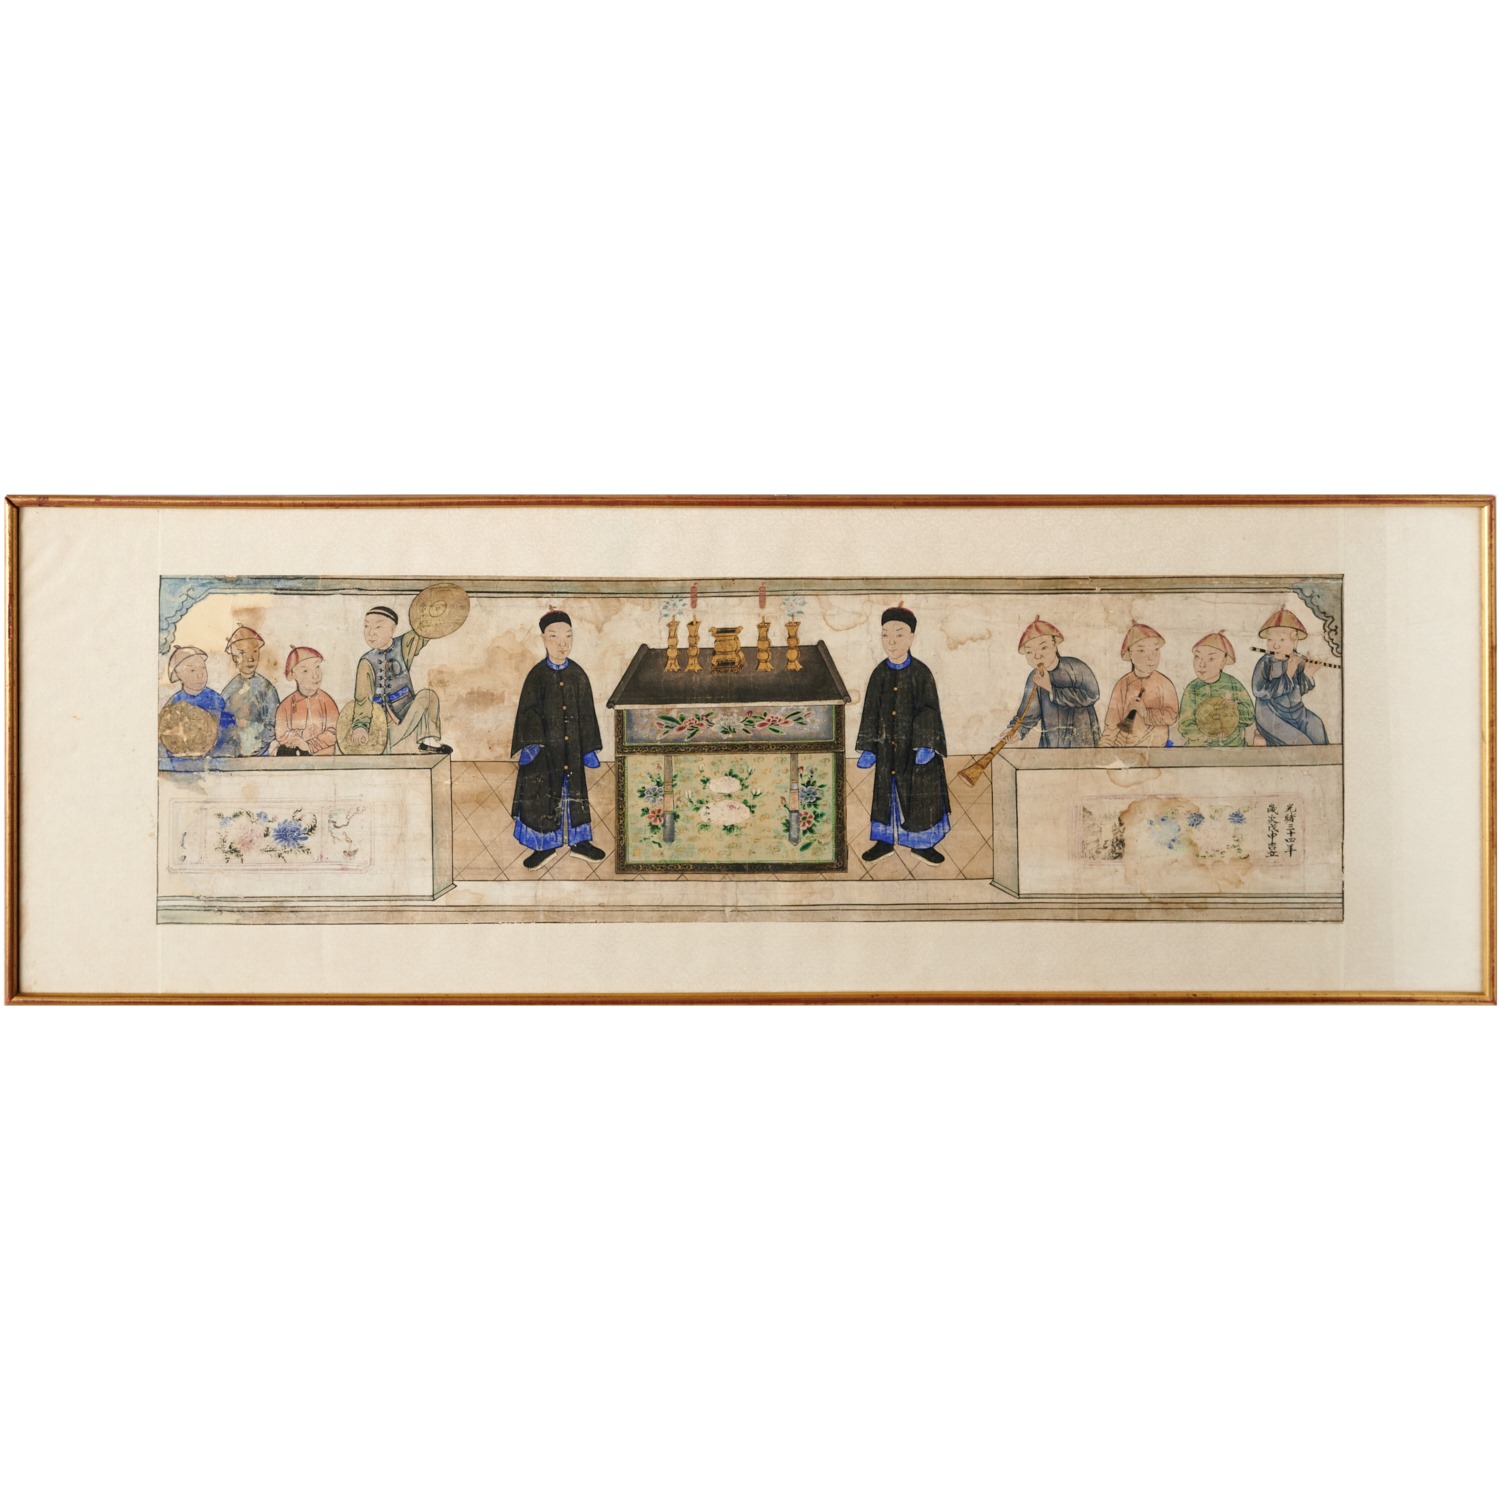 CHINESE SCHOOL SCROLL PAINTING 361d49